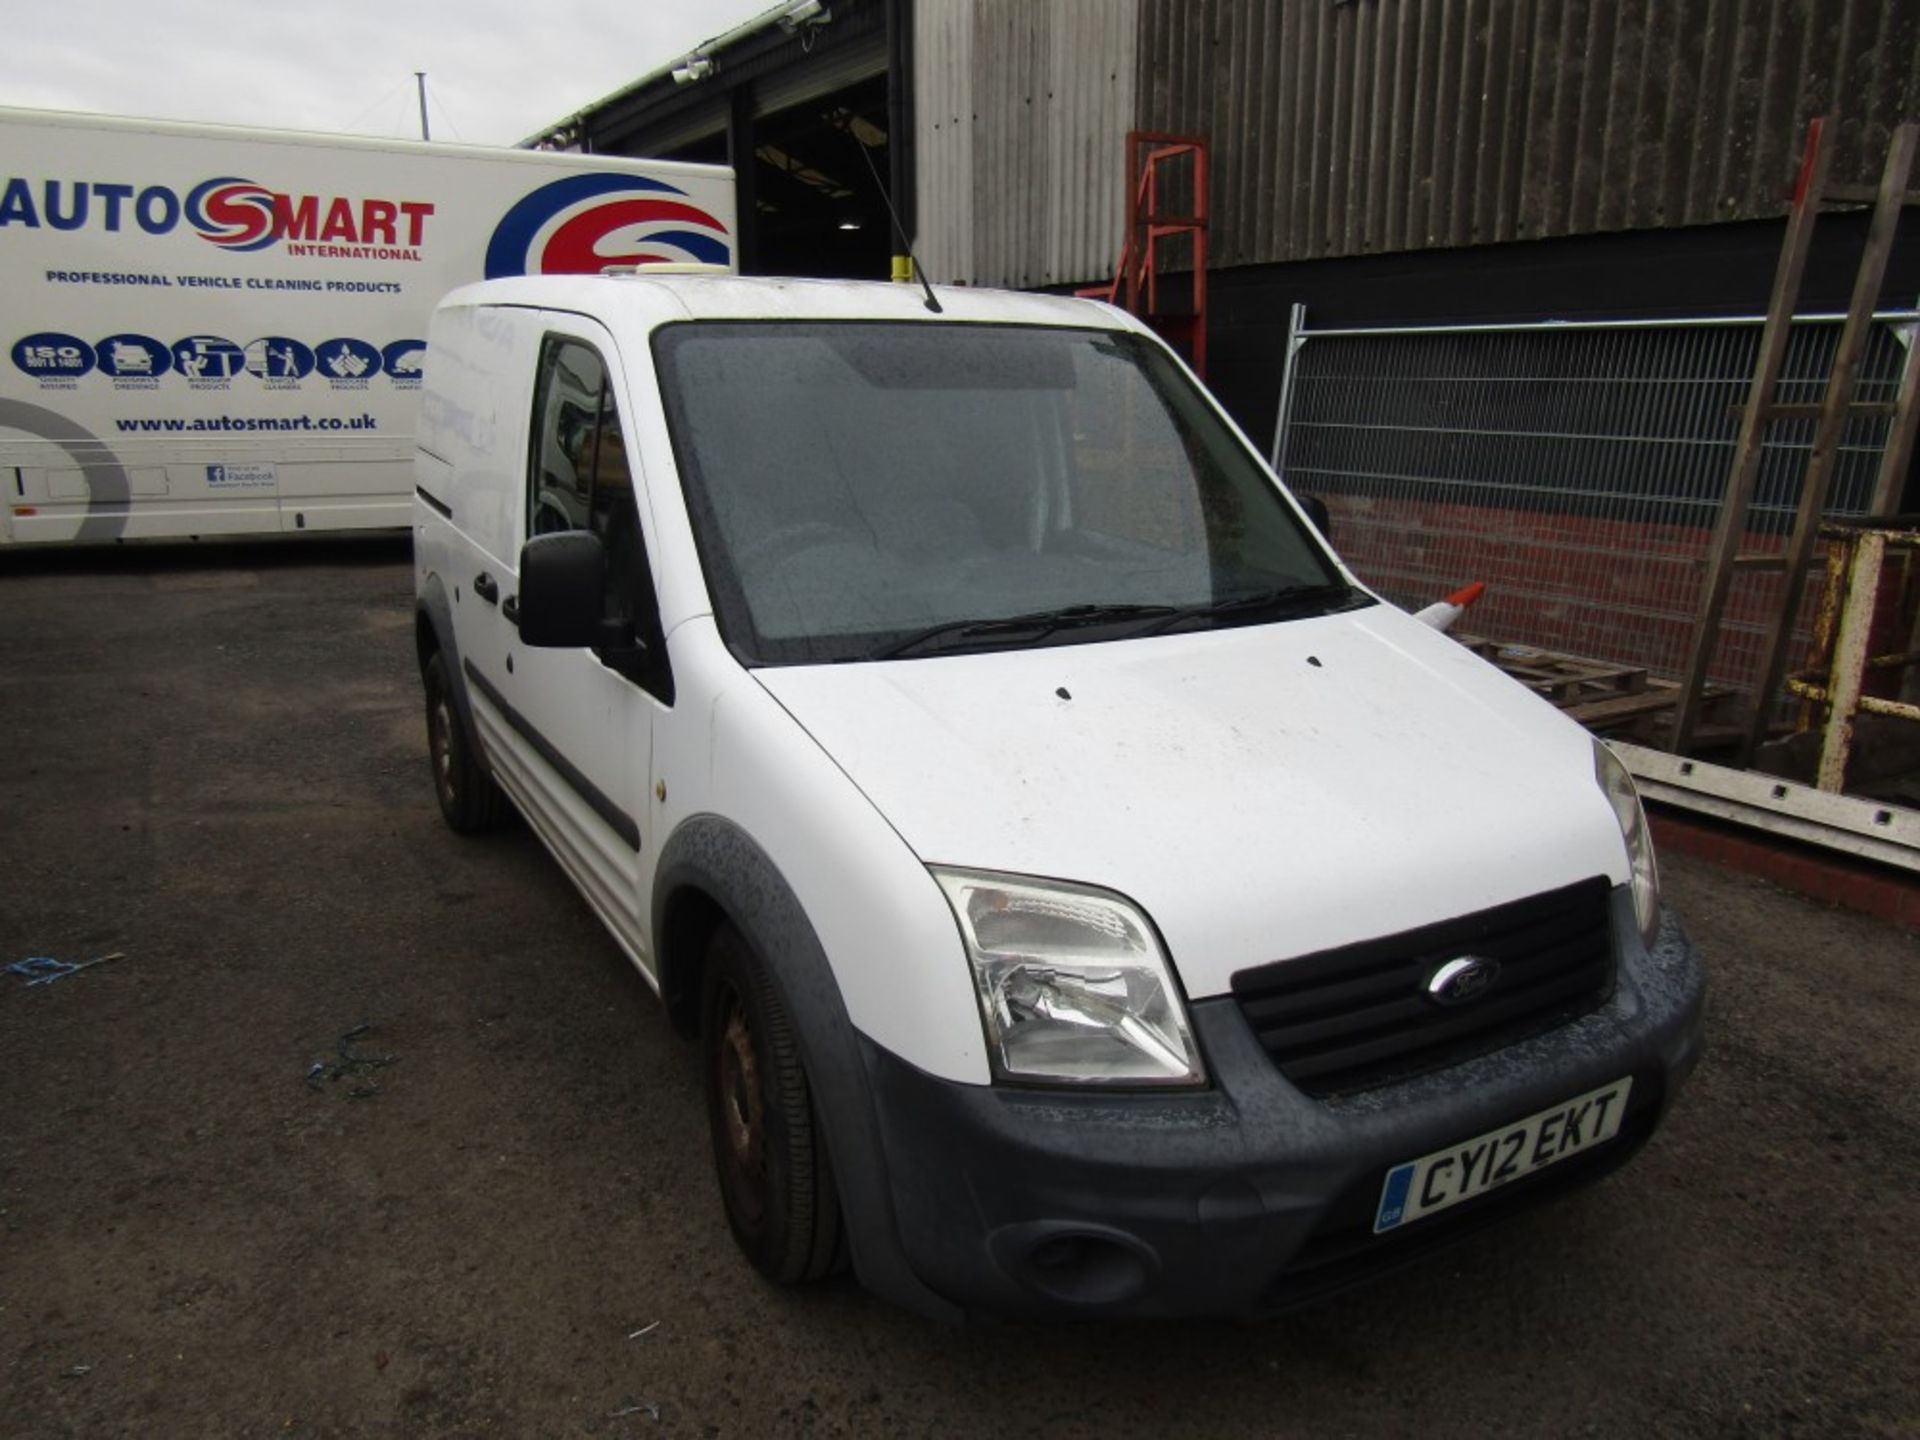 12 reg FORD TRANSIT CONNECT 90 T200 (DIRECT COUNCIL) 1ST REG 07/12, TEST 07/23, 113365M, V5 HERE,